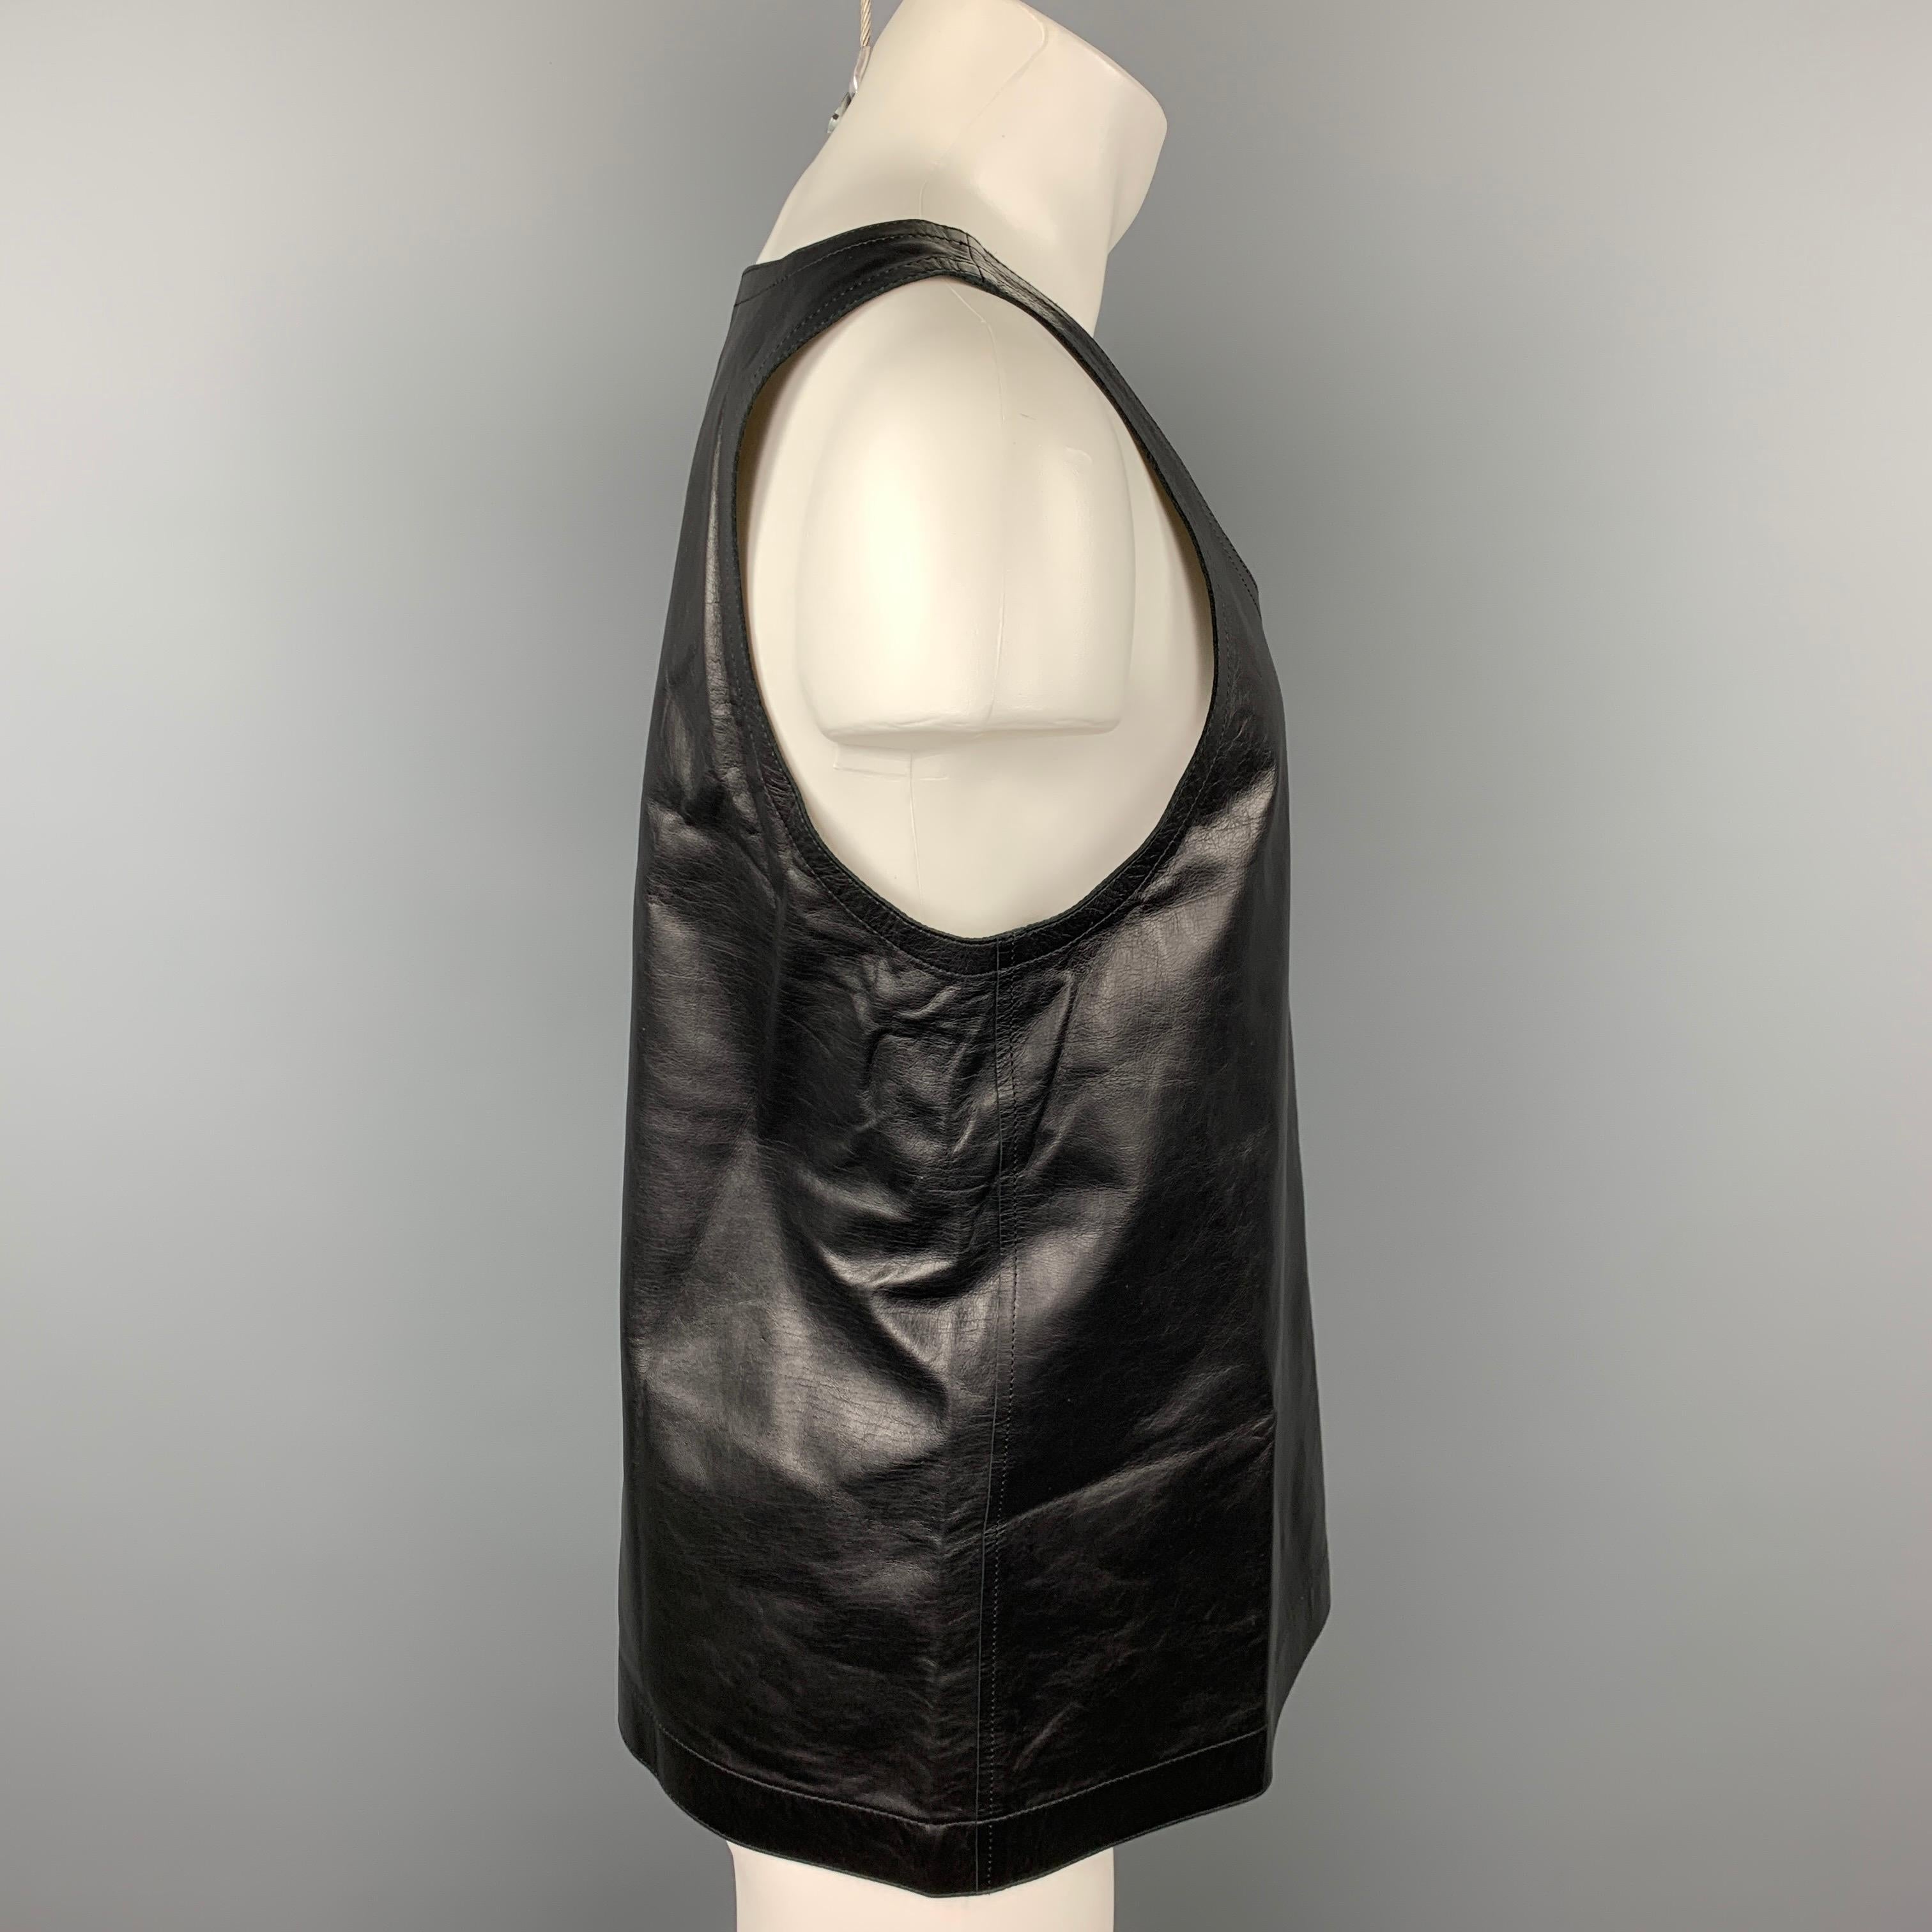 DRIES VAN NOTEN S/S 20 tank top comes in a black leather featuring a side zipper closure design.

New With Tags. 
Marked: L
Original Retail Price: $1,275.00

Measurements:

Shoulder: 14.5 in.
Chest: 40 in.
Length: 26 in. 